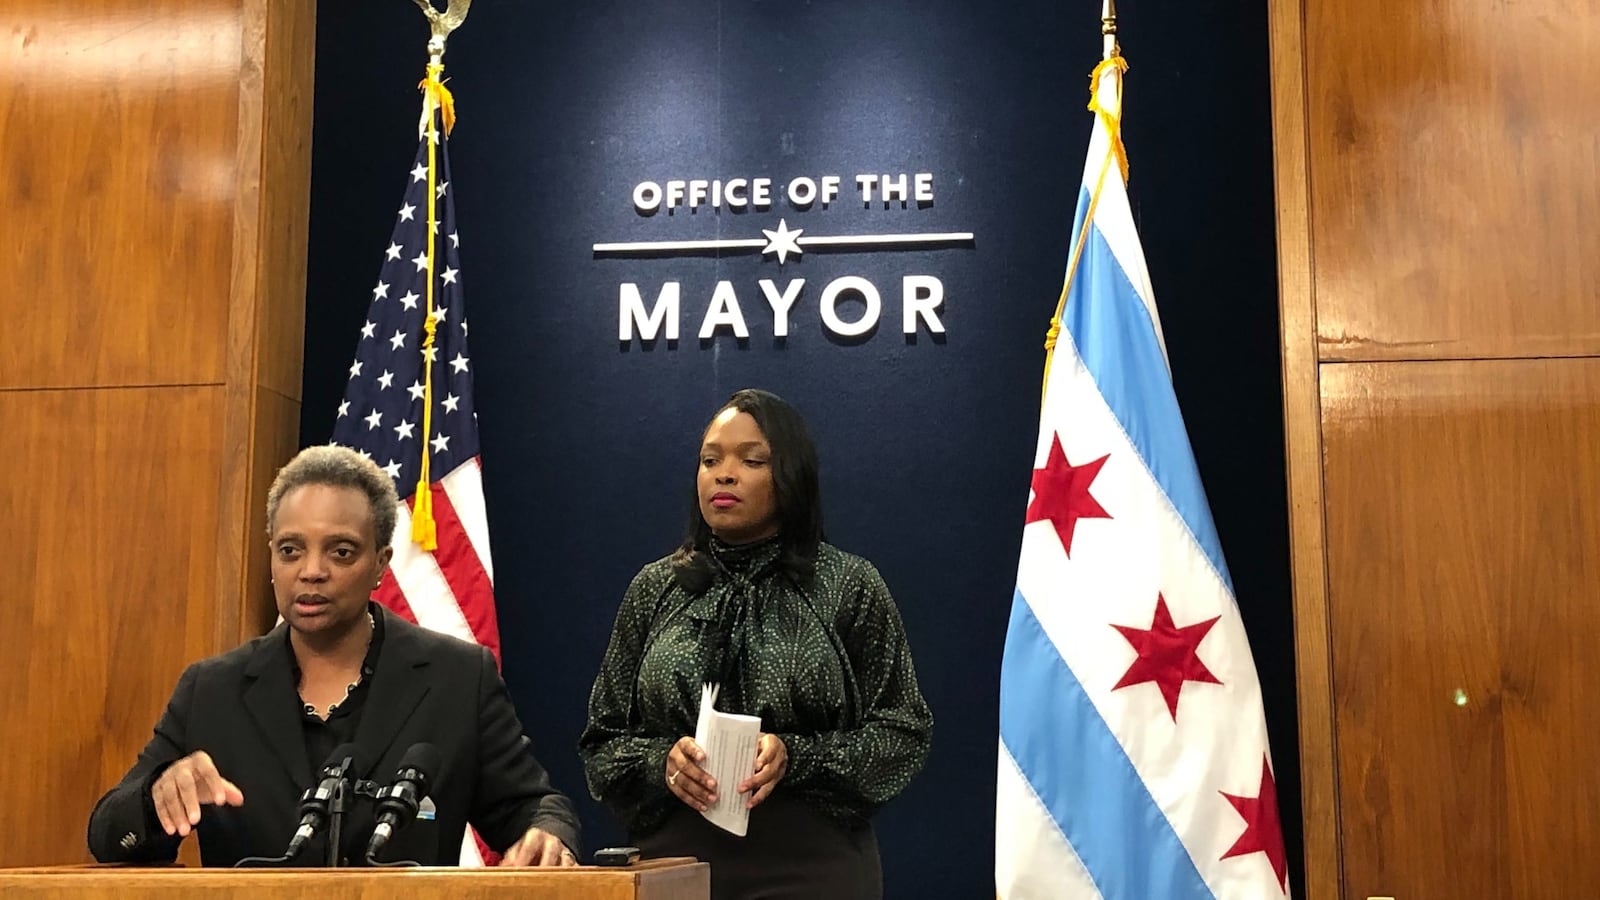 Chicago Mayor Lori Lightfoot speaks at the podium, with schools chief Janice Jackson standing behind, on Oct .15, 2019